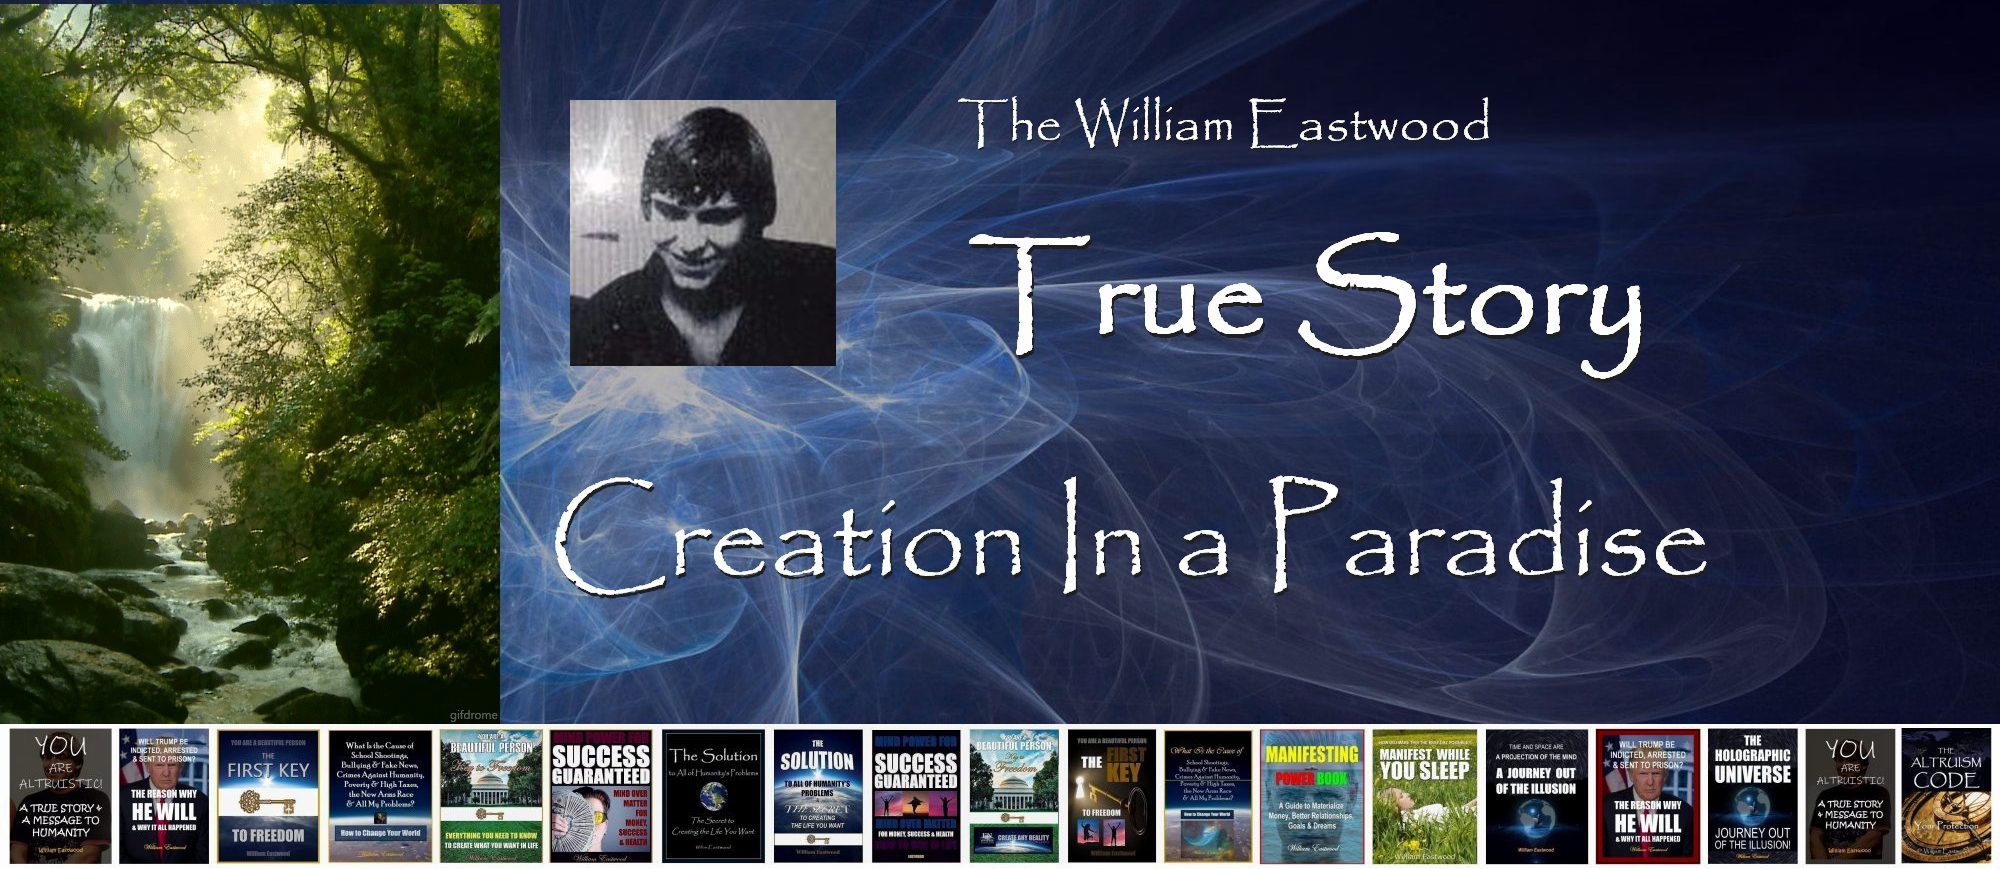 THE HOLOGRAPHIC UNIVERSE: William Eastwood True Story of Creation